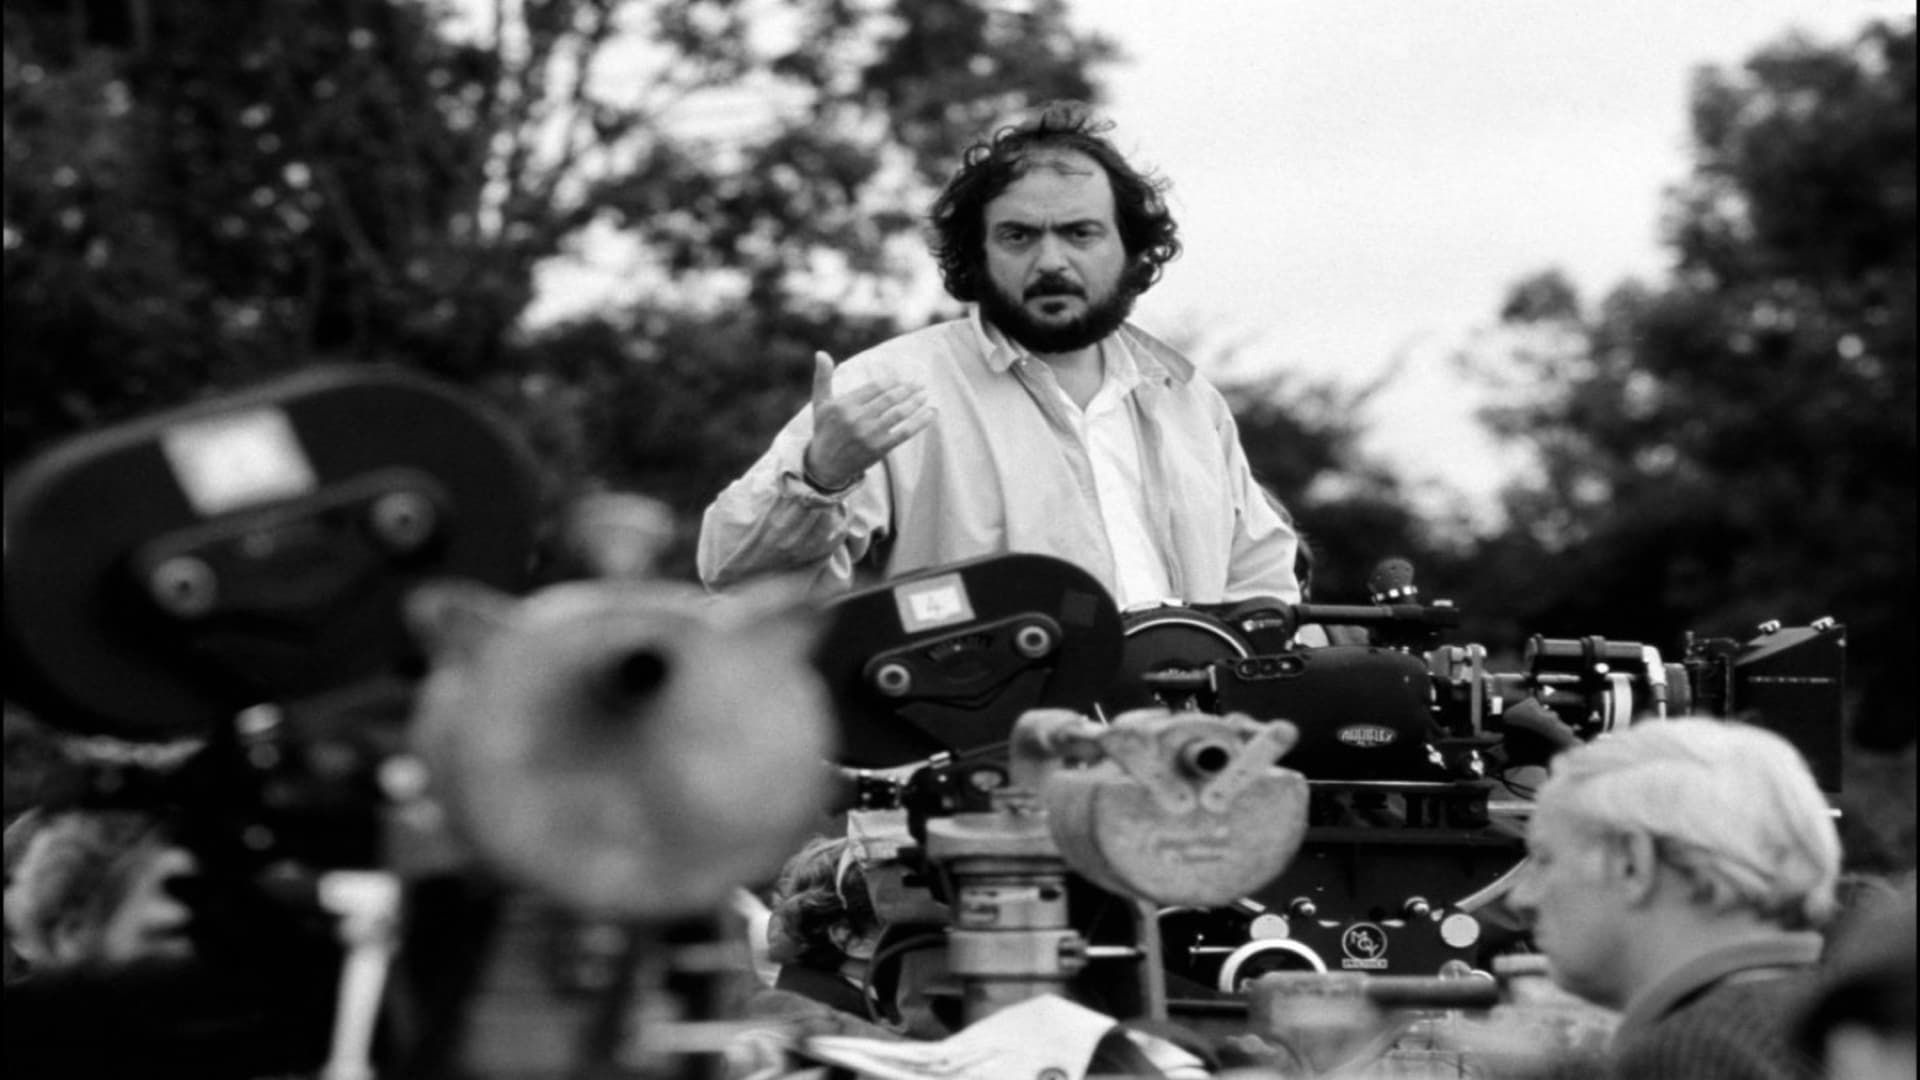 Lost Kubrick: The Unfinished Films of Stanley Kubrick background